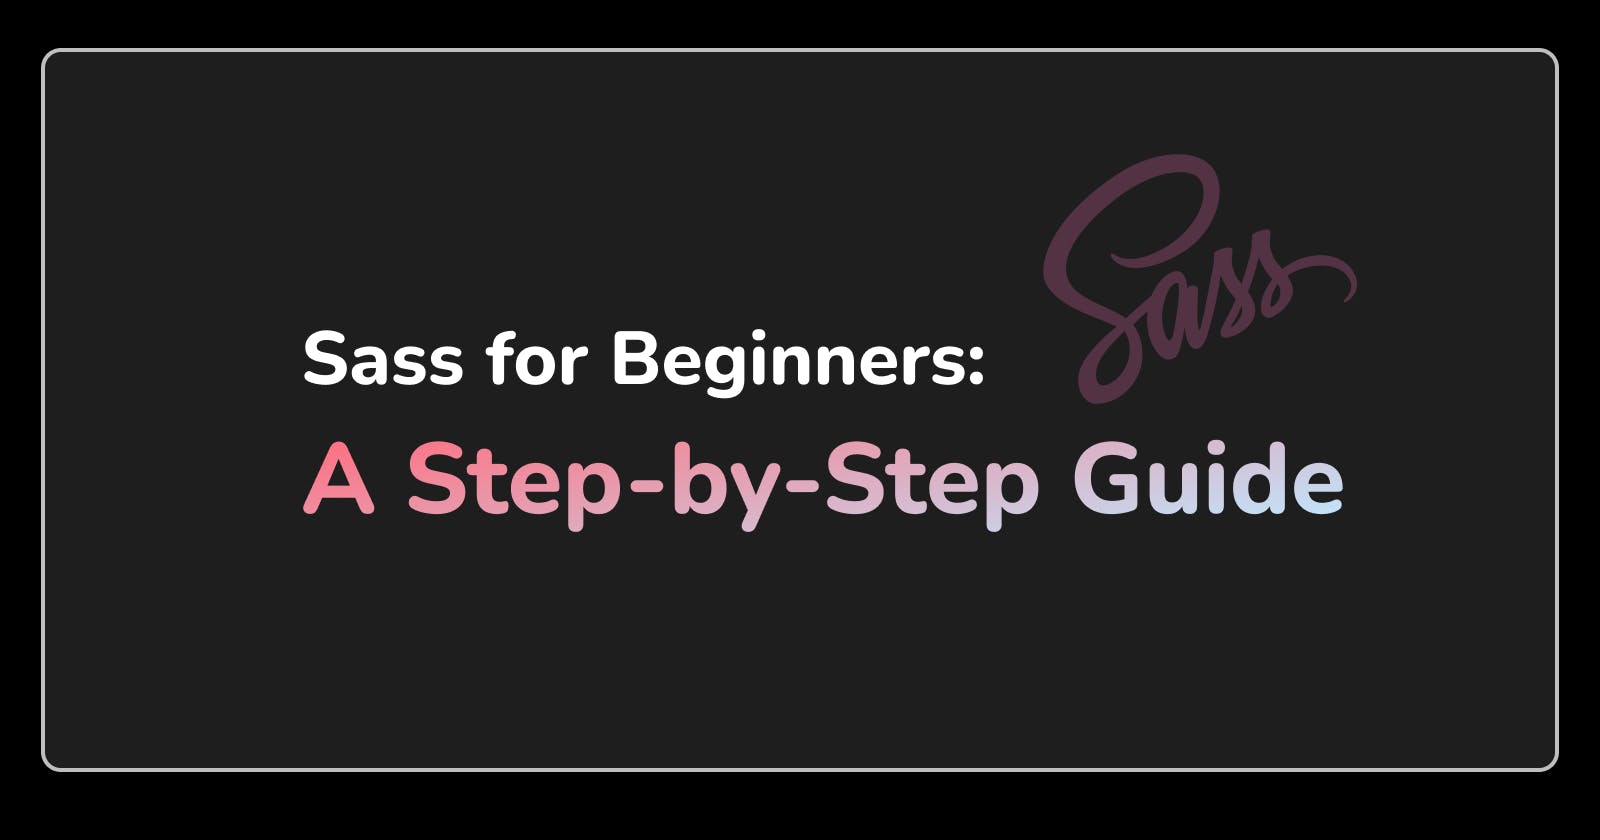 Sass for Beginners: A Step-by-Step Guide